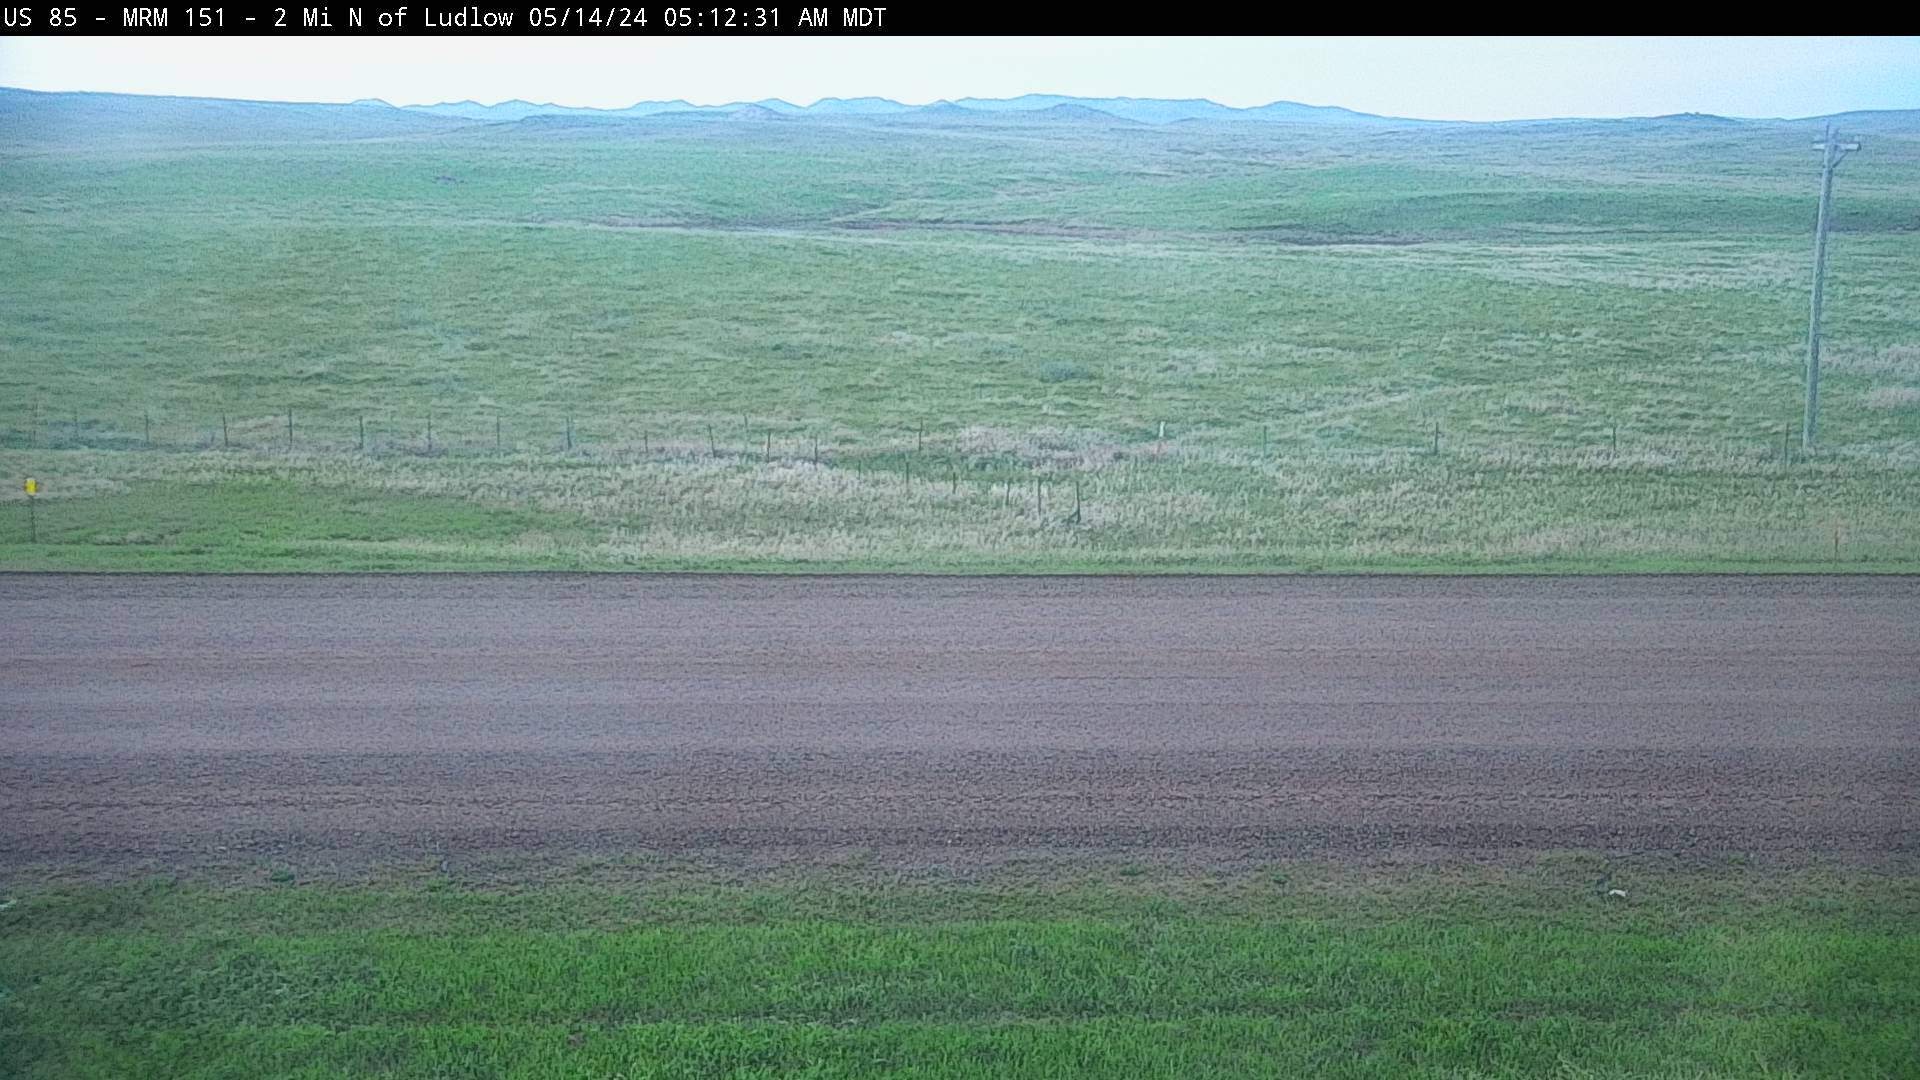 Traffic Cam 2 miles north of town along US-85 2 MP 150.1 - East Player